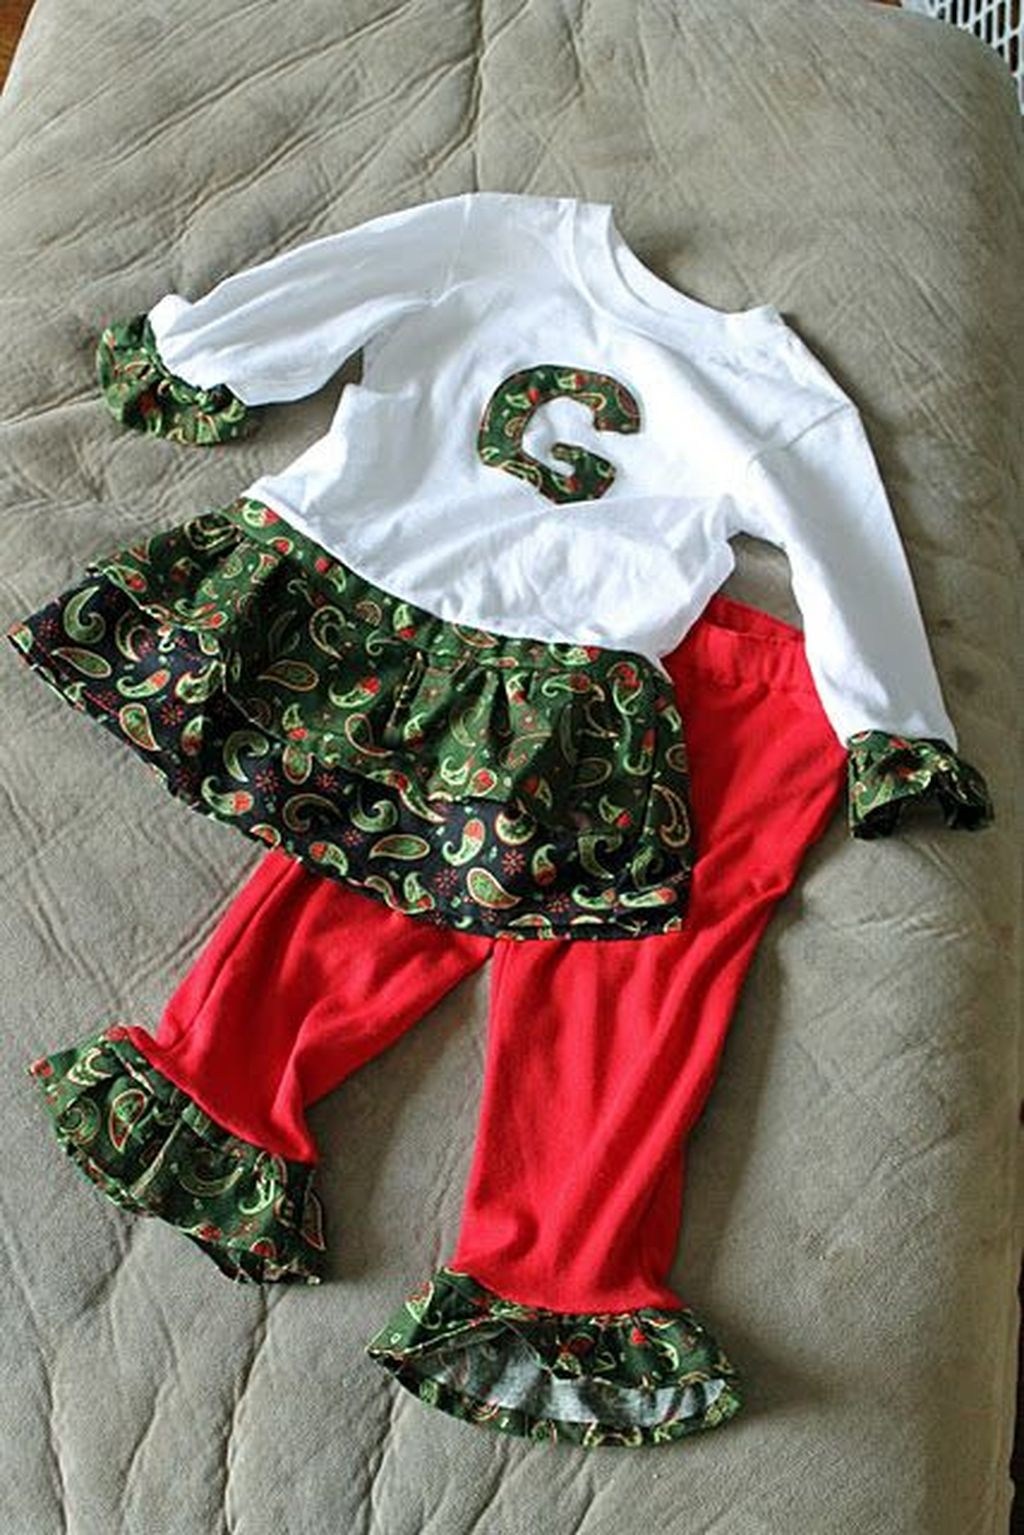 48 Astonishing Christmas Outfits For Small Girls Ideas - LUVLYFASHION